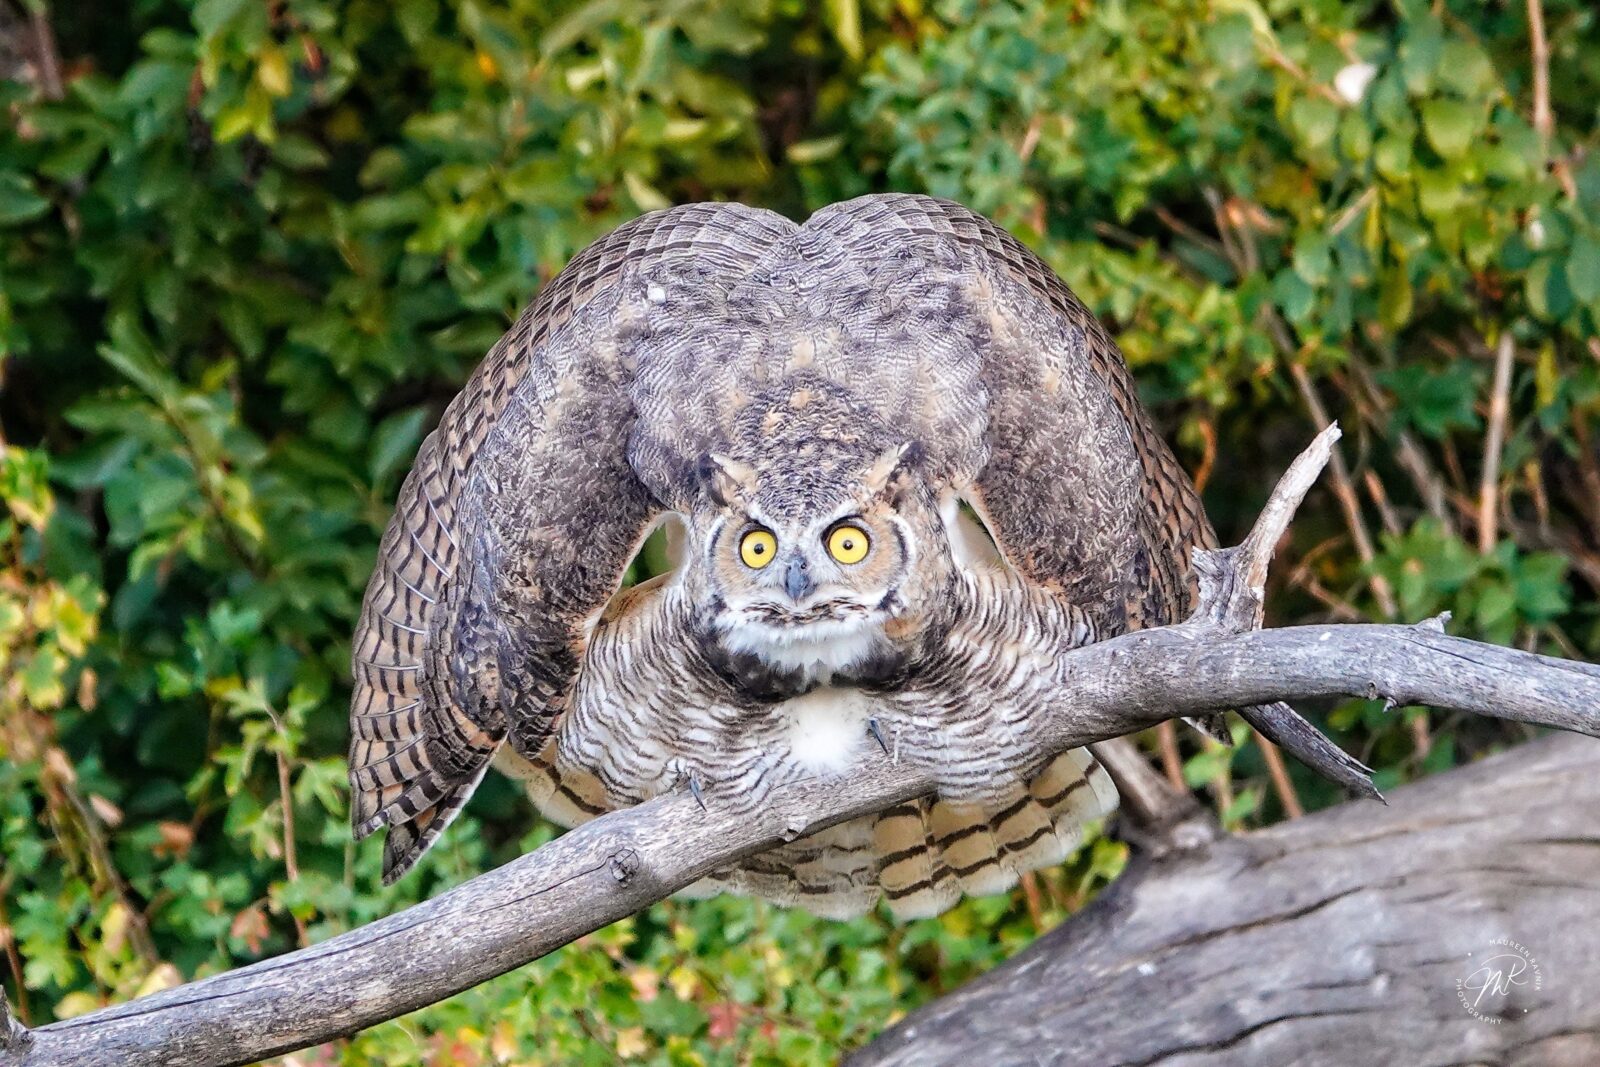 This owl, photographed at South Platte Park, exhibiting rarely seen defensive behavior. Photo by Maureen Ravnik